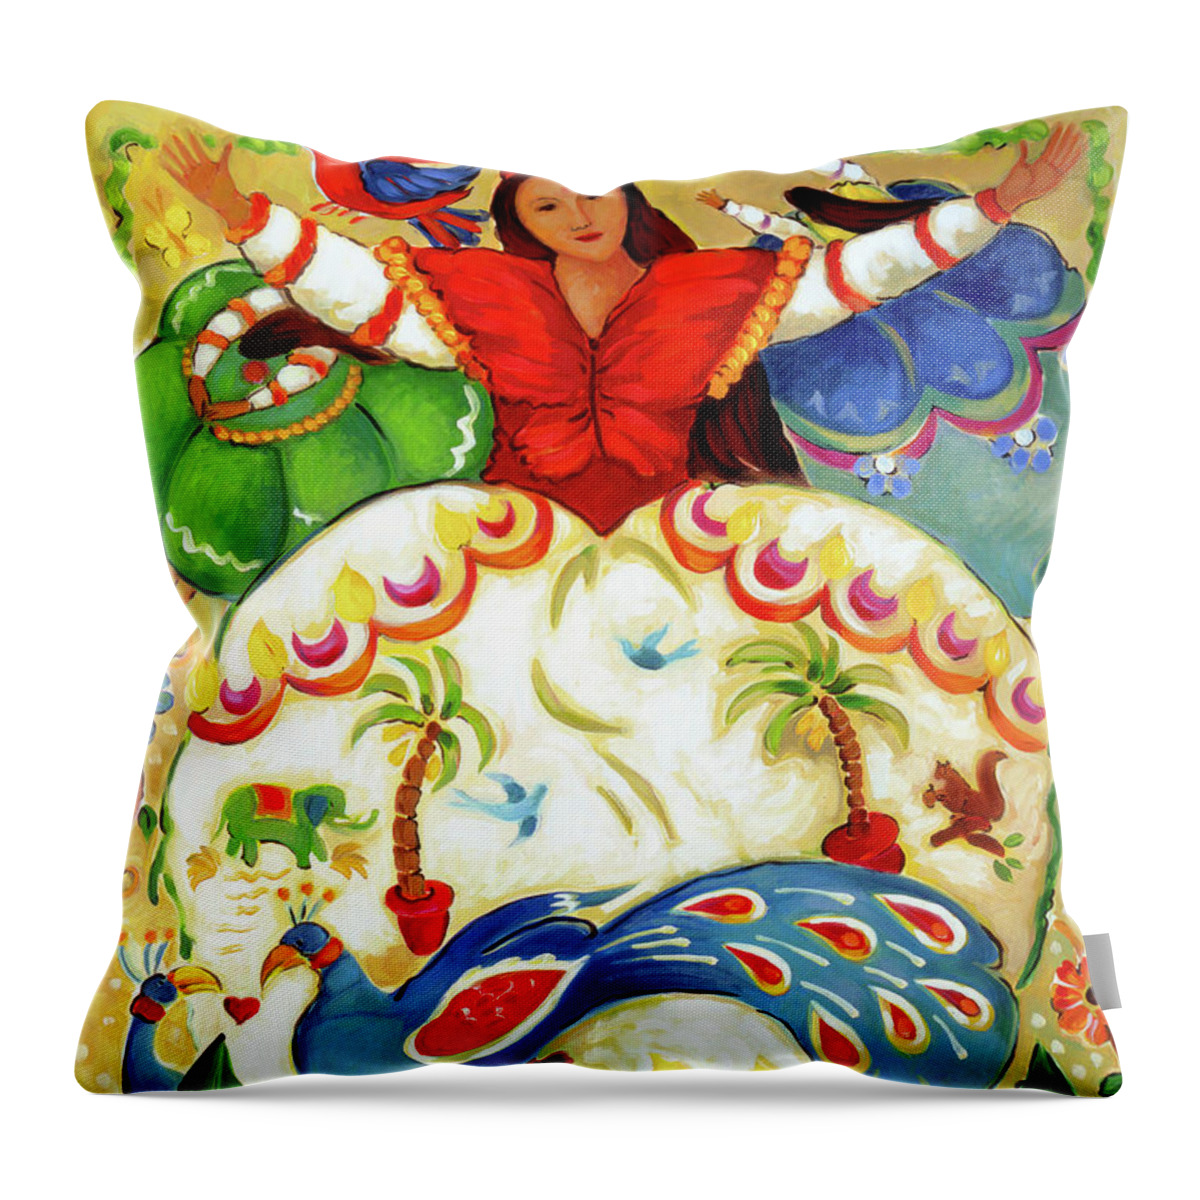 Woman Throw Pillow featuring the painting Indian Butterfly by Linda Carter Holman